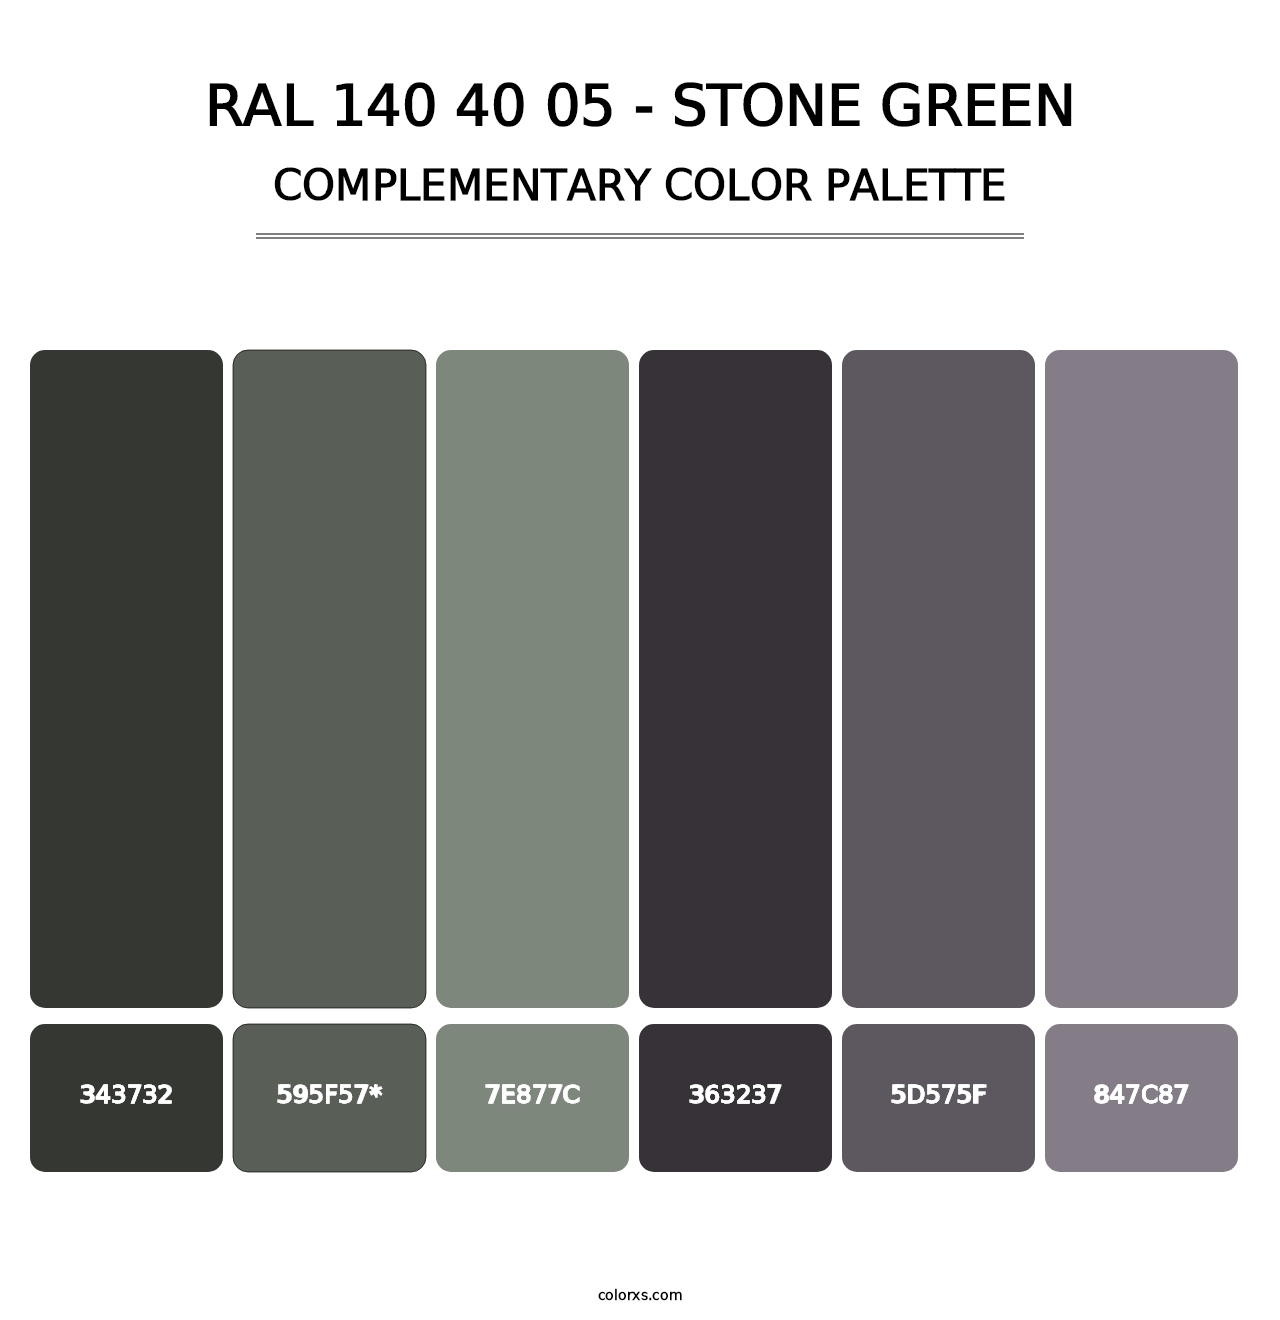 RAL 140 40 05 - Stone Green - Complementary Color Palette